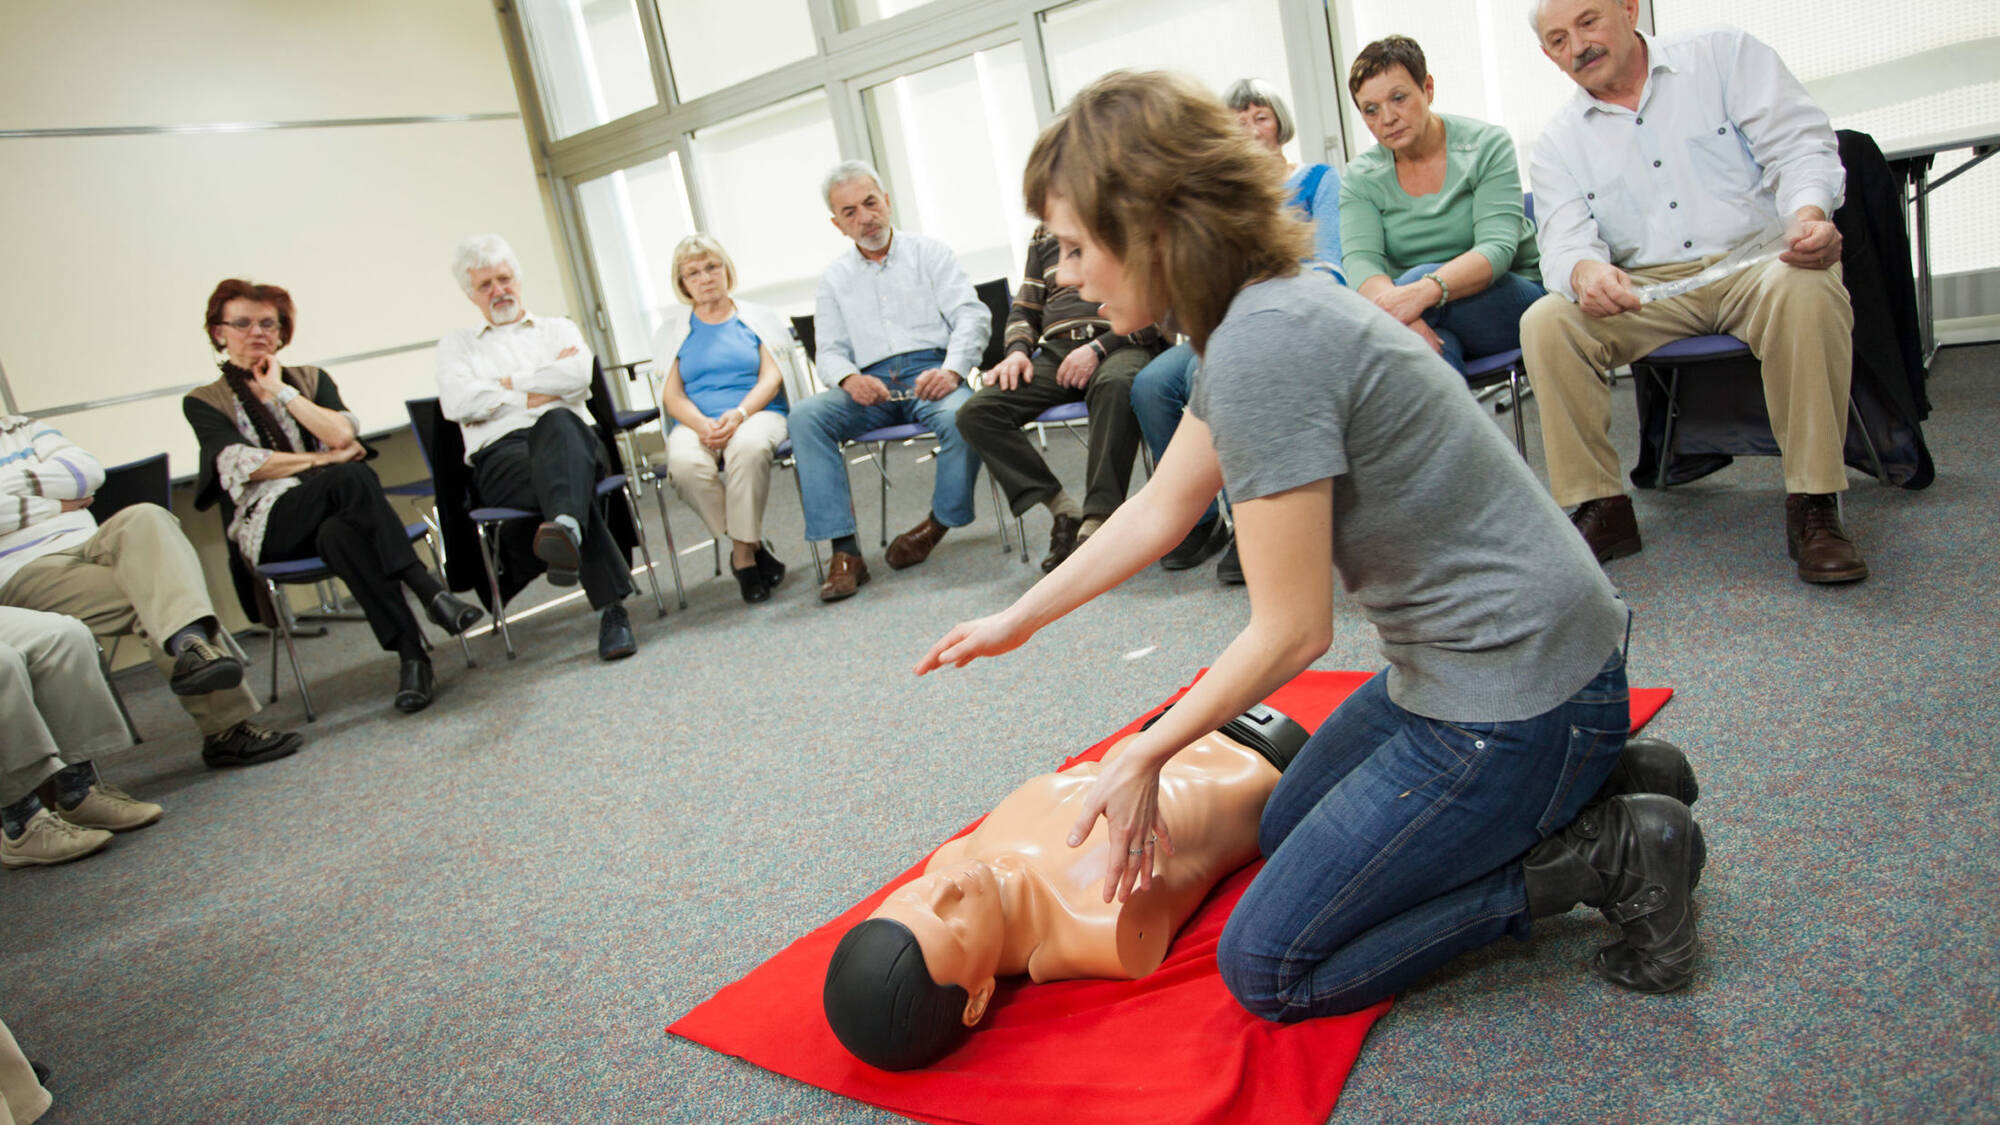 First aid short course classroom demonstration